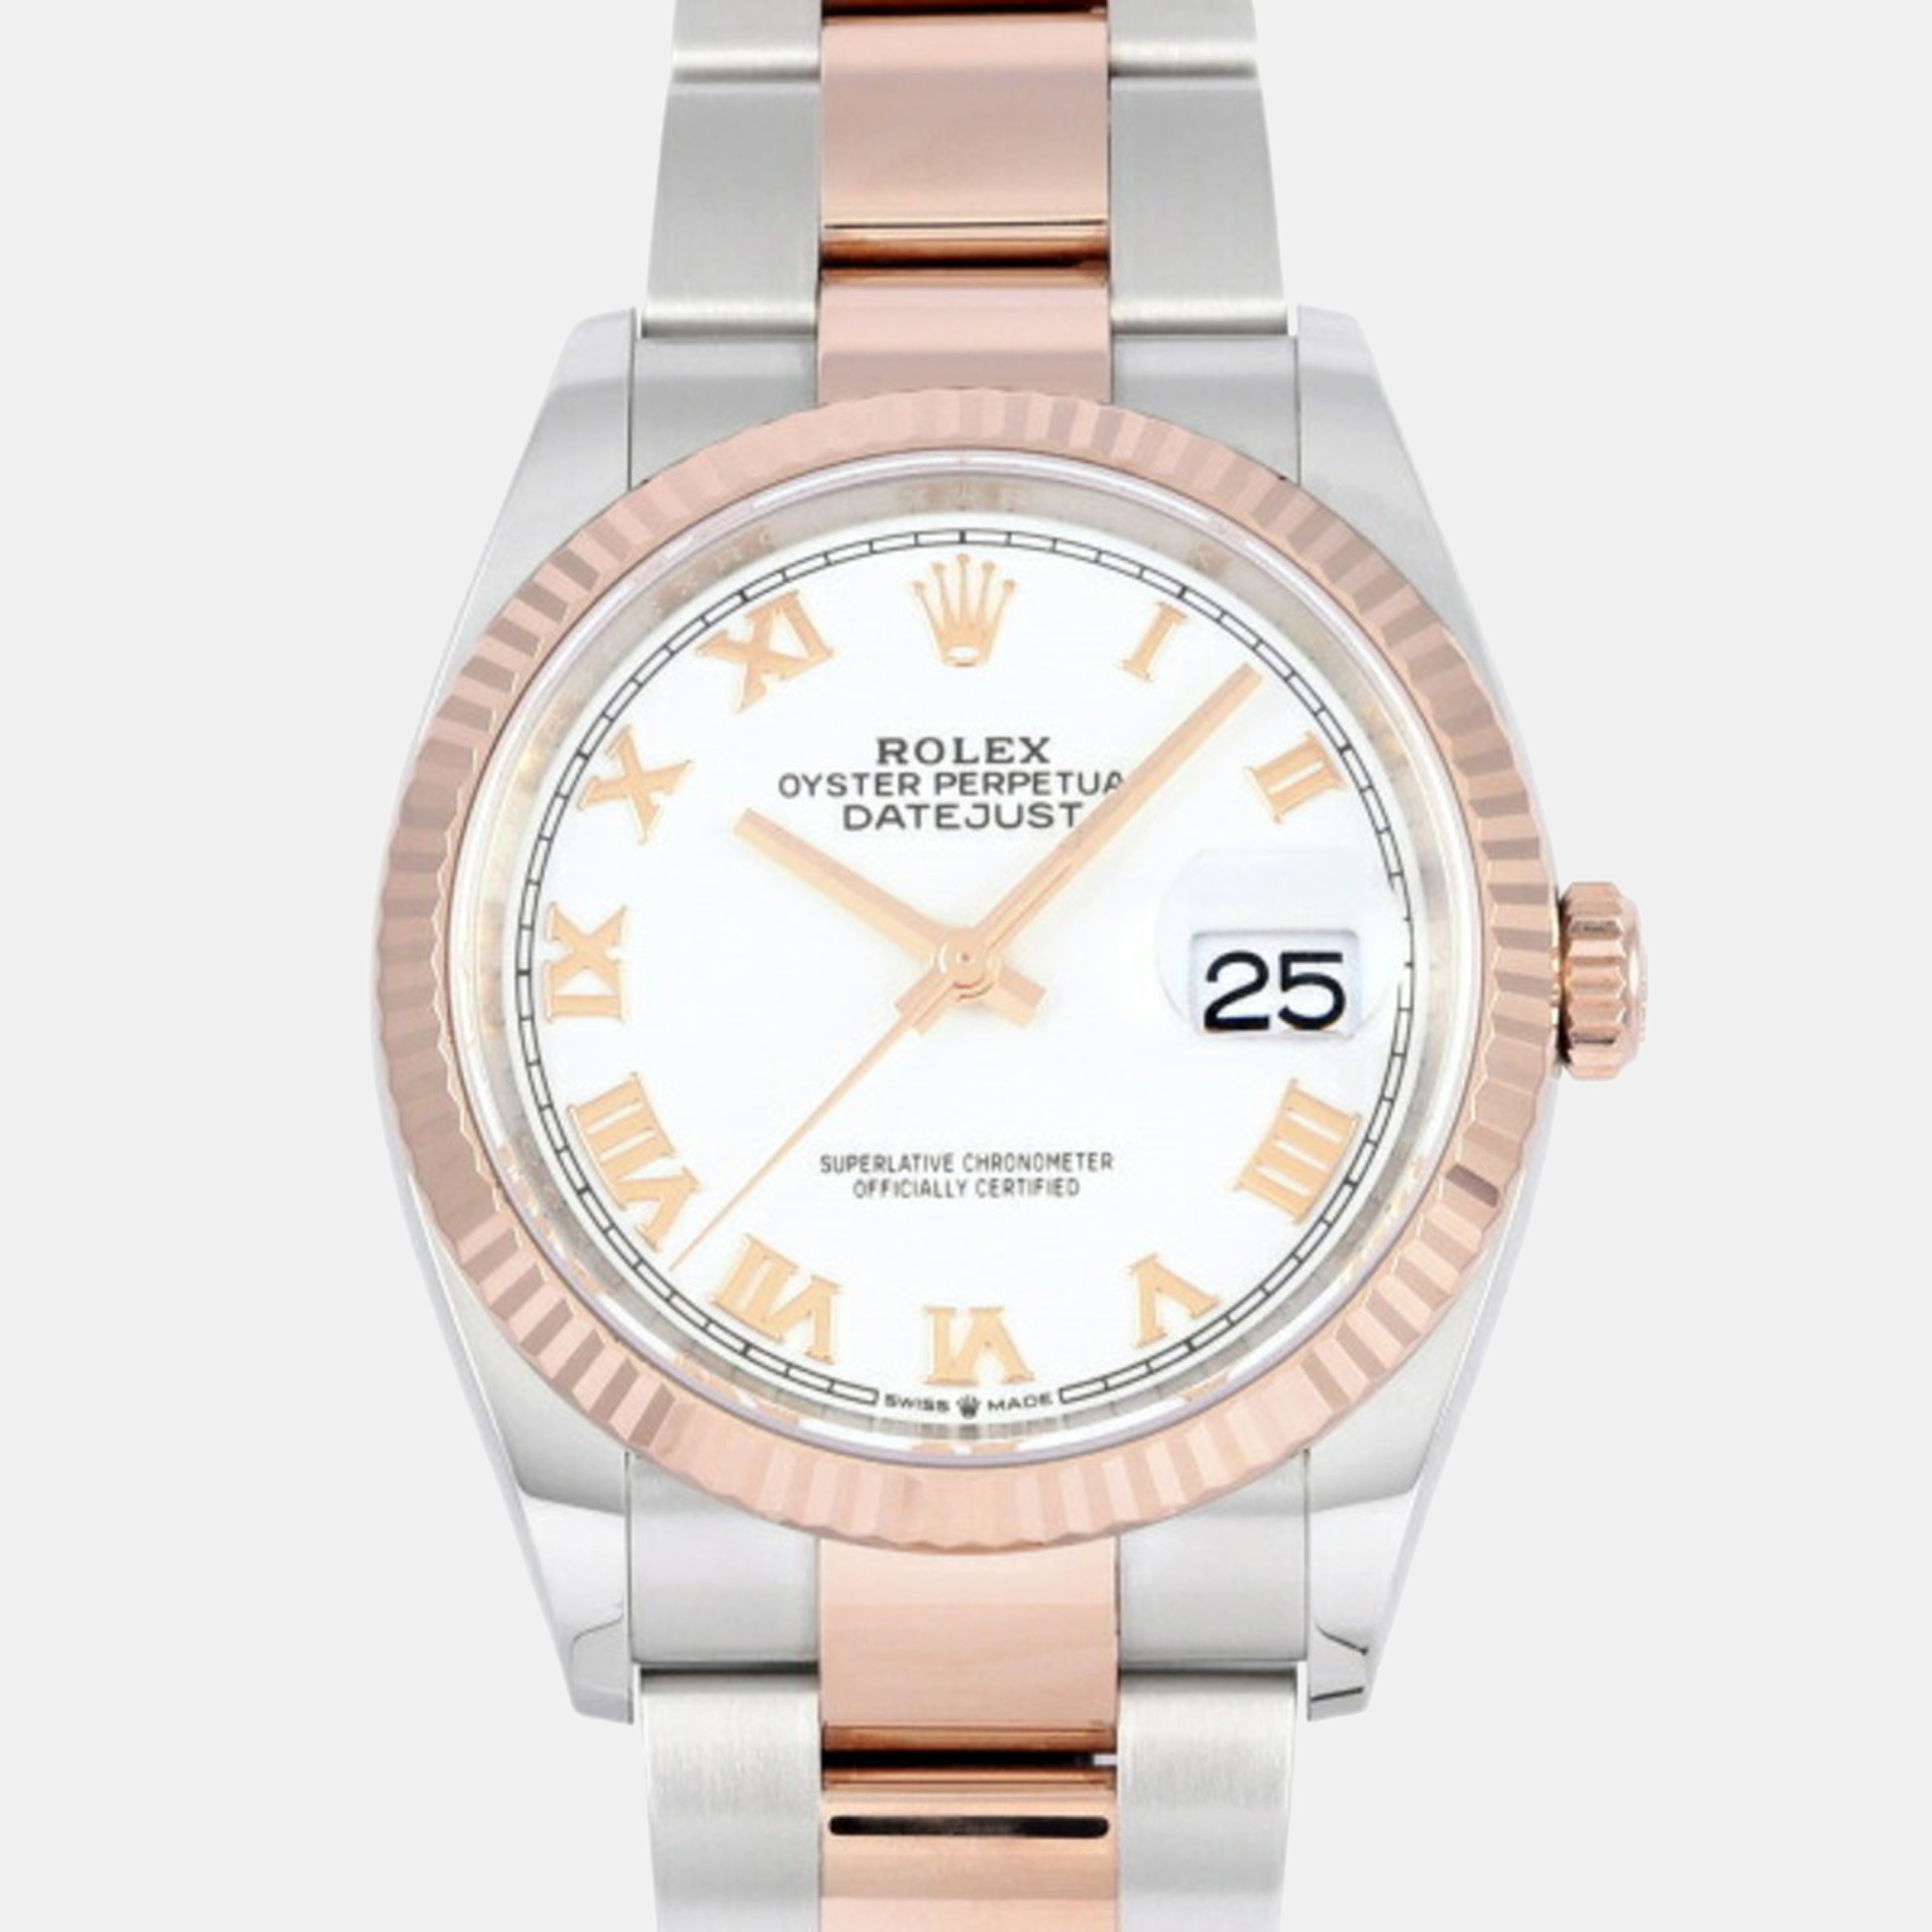 Rolex White 18k Rose Gold And Stainless Steel Datejust 126231 Automatic Men's Wristwatch 36 Mm